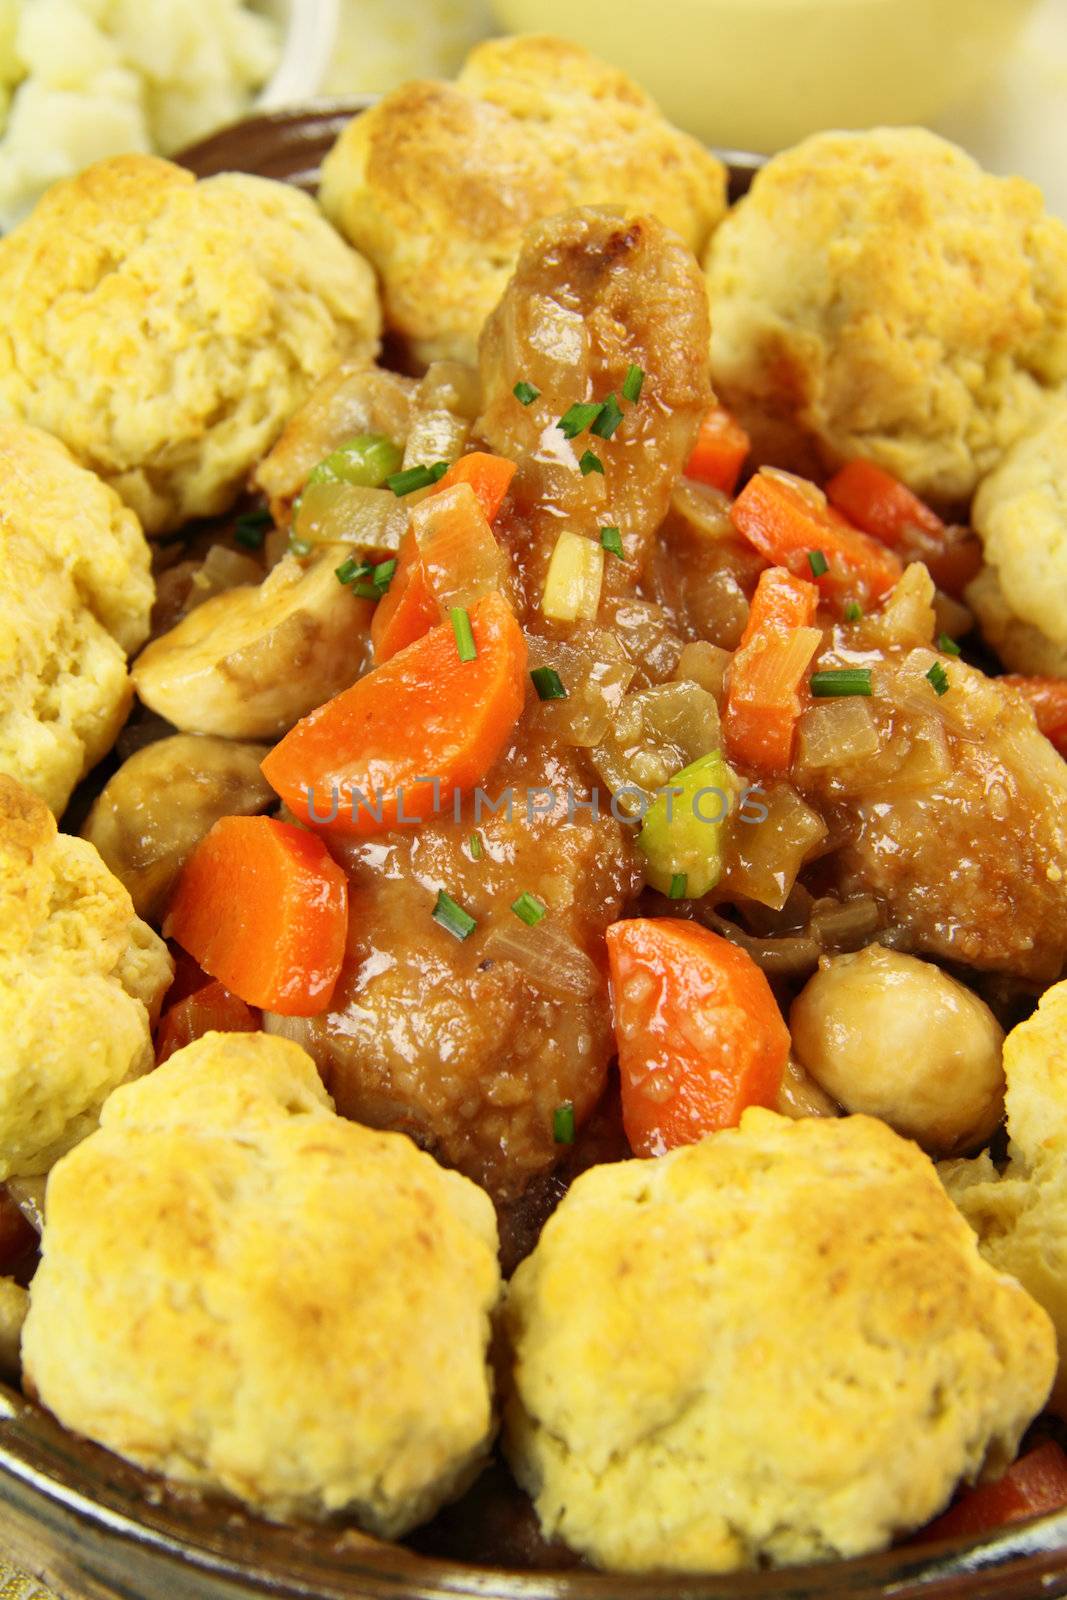 Delicious chicken and dumpling casserole with with a rich gravy.